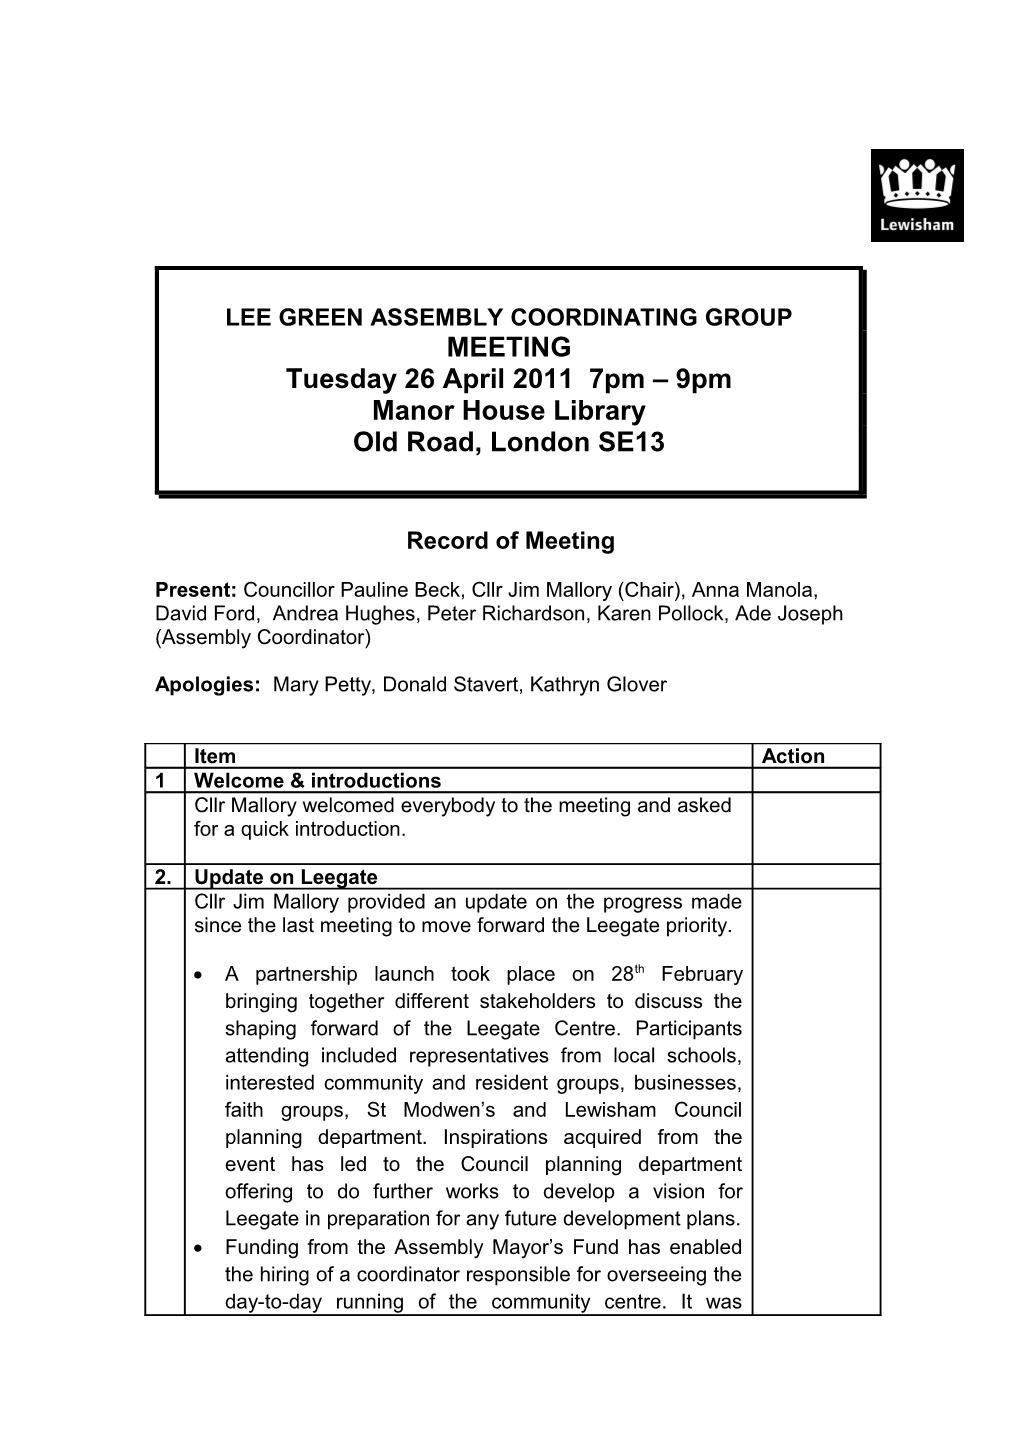 Lee Green Coordinating Group Minutes 26 April 2011